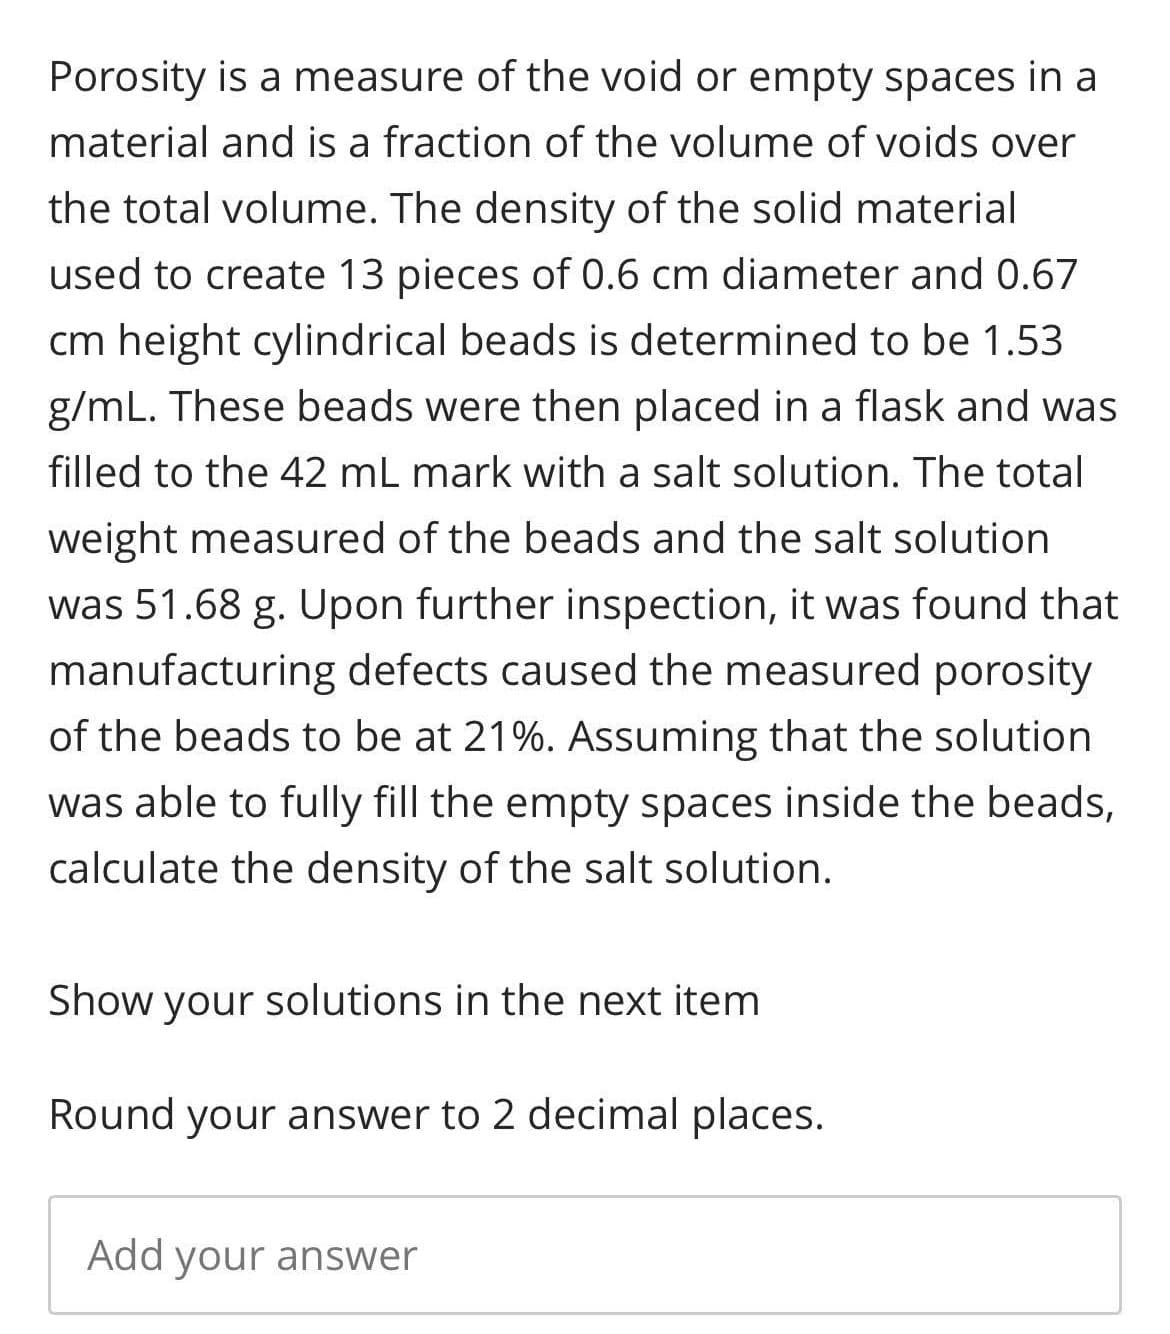 Porosity is a measure of the void or empty spaces in a
material and is a fraction of the volume of voids over
the total volume. The density of the solid material
used to create 13 pieces of 0.6 cm diameter and 0.67
cm height cylindrical beads is determined to be 1.53
g/mL. These beads were then placed in a flask and was
filled to the 42 mL mark with a salt solution. The total
weight measured of the beads and the salt solution
was 51.68 g. Upon further inspection, it was found that
manufacturing defects caused the measured porosity
of the beads to be at 21%. Assuming that the solution
was able to fully fill the empty spaces inside the beads,
calculate the density of the salt solution.
Show your solutions in the next item
Round your answer to 2 decimal places.
Add your answer
